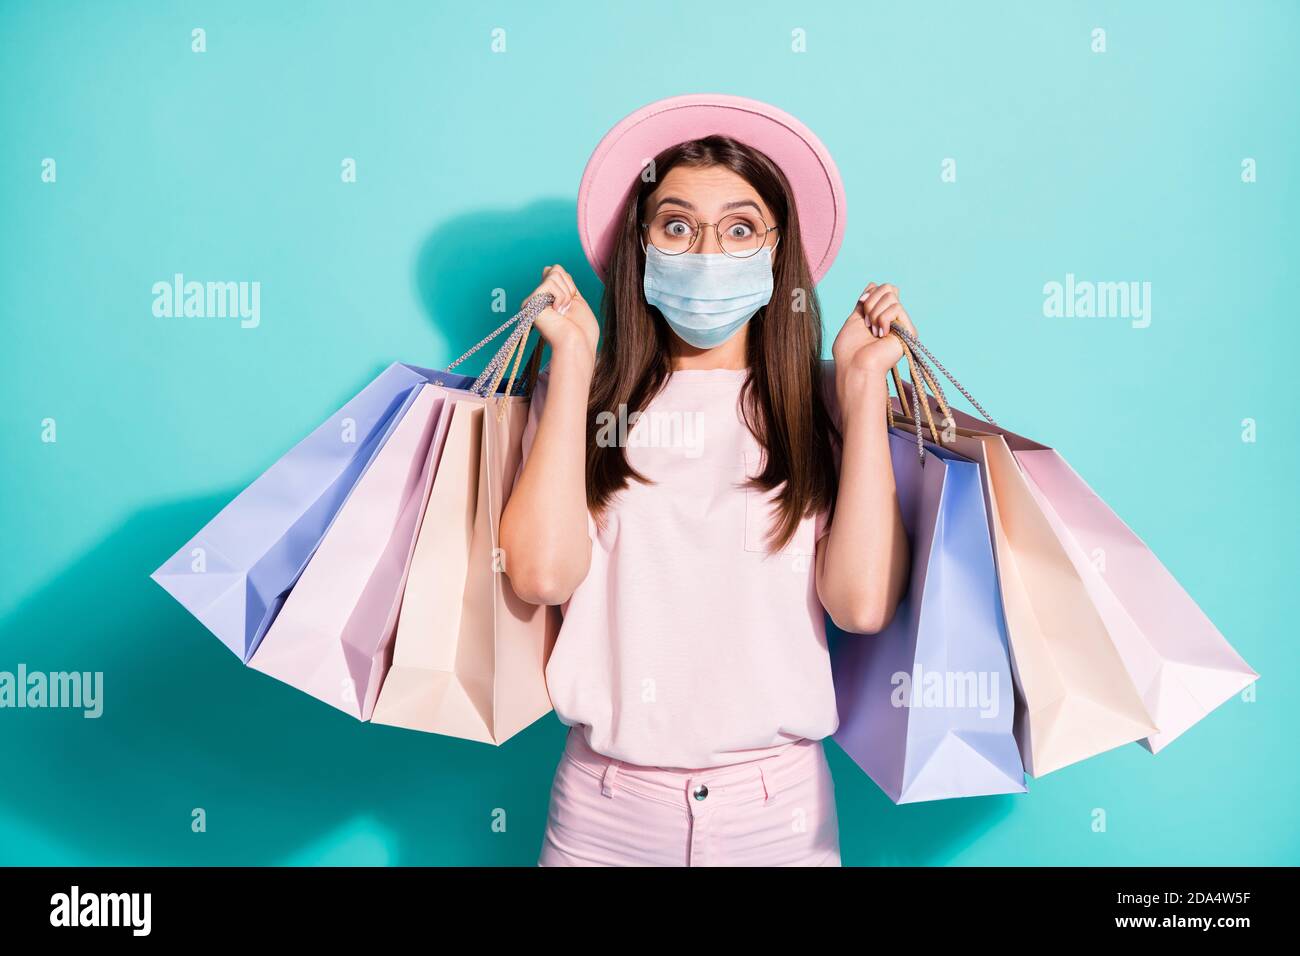 Portrait of delighted girl fashionista carrying bags wear safety mask isolated green turquoise color background Stock Photo